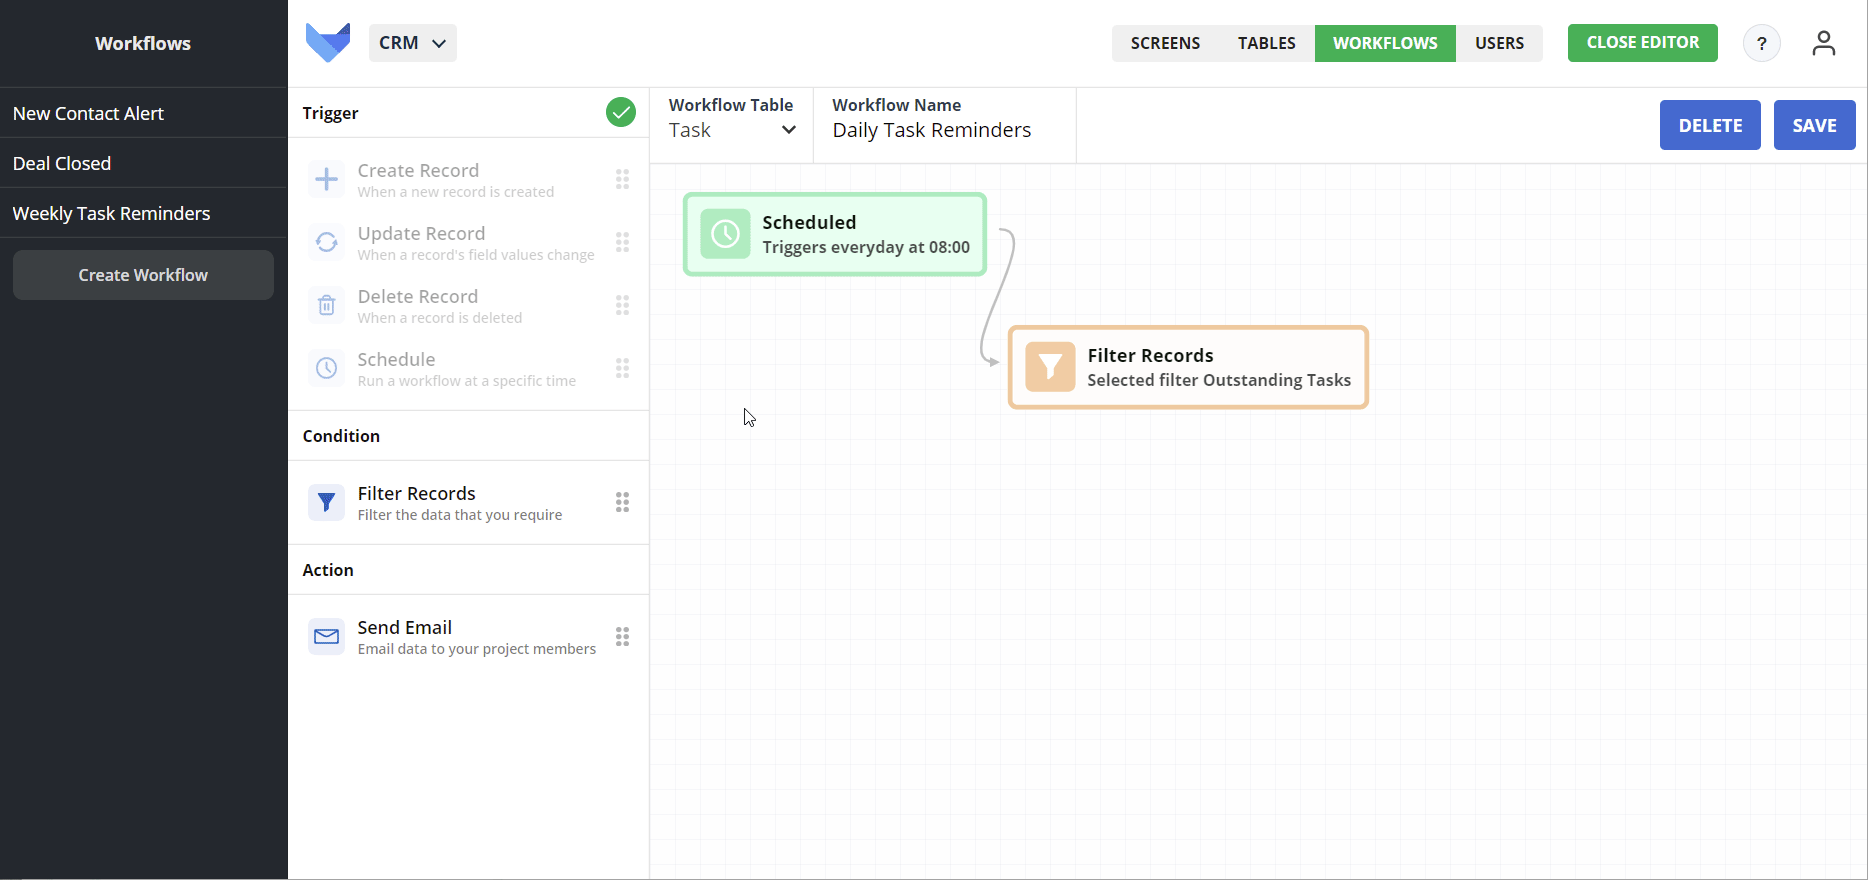 Adding a Send Email Workflow block to the Workflow canvas